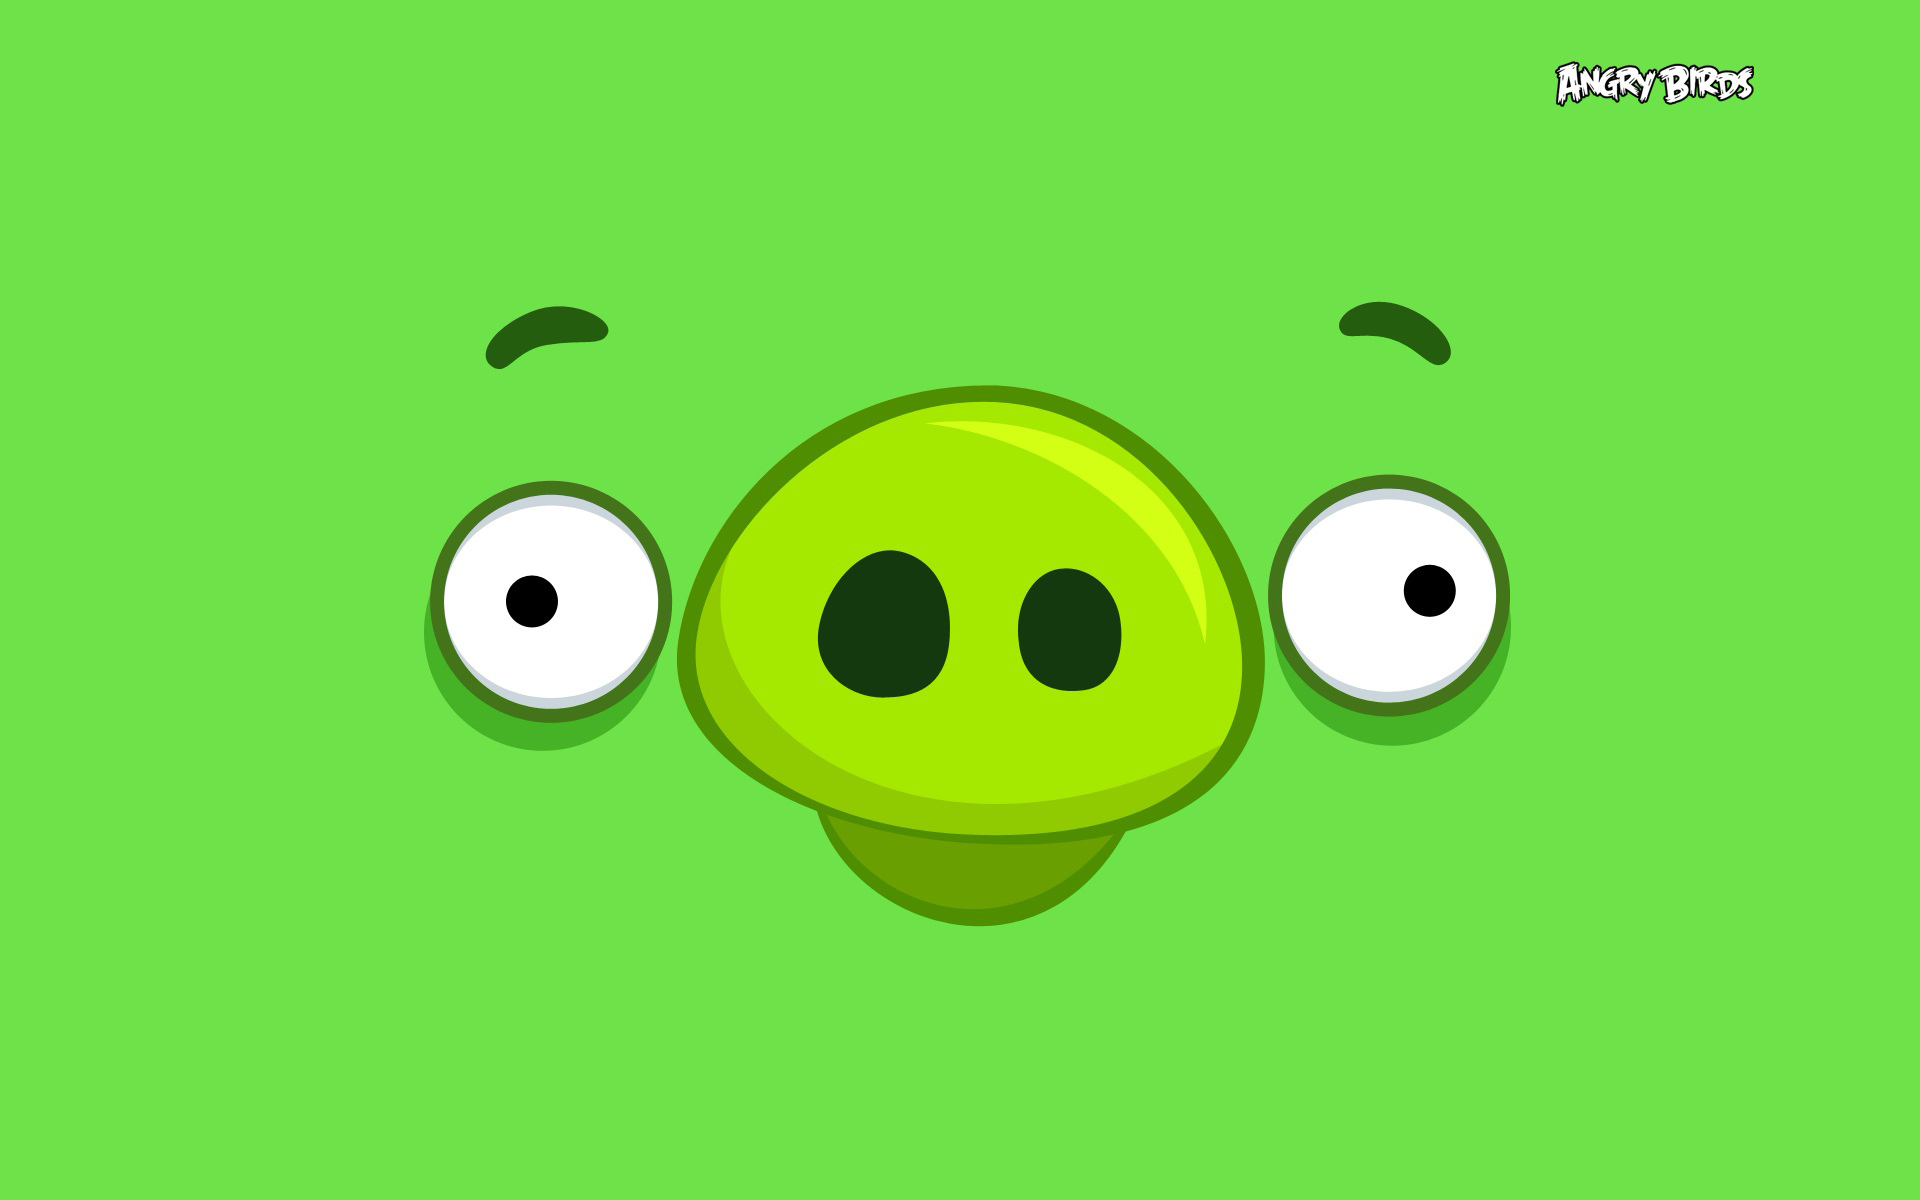 angry birds, games, green Full HD